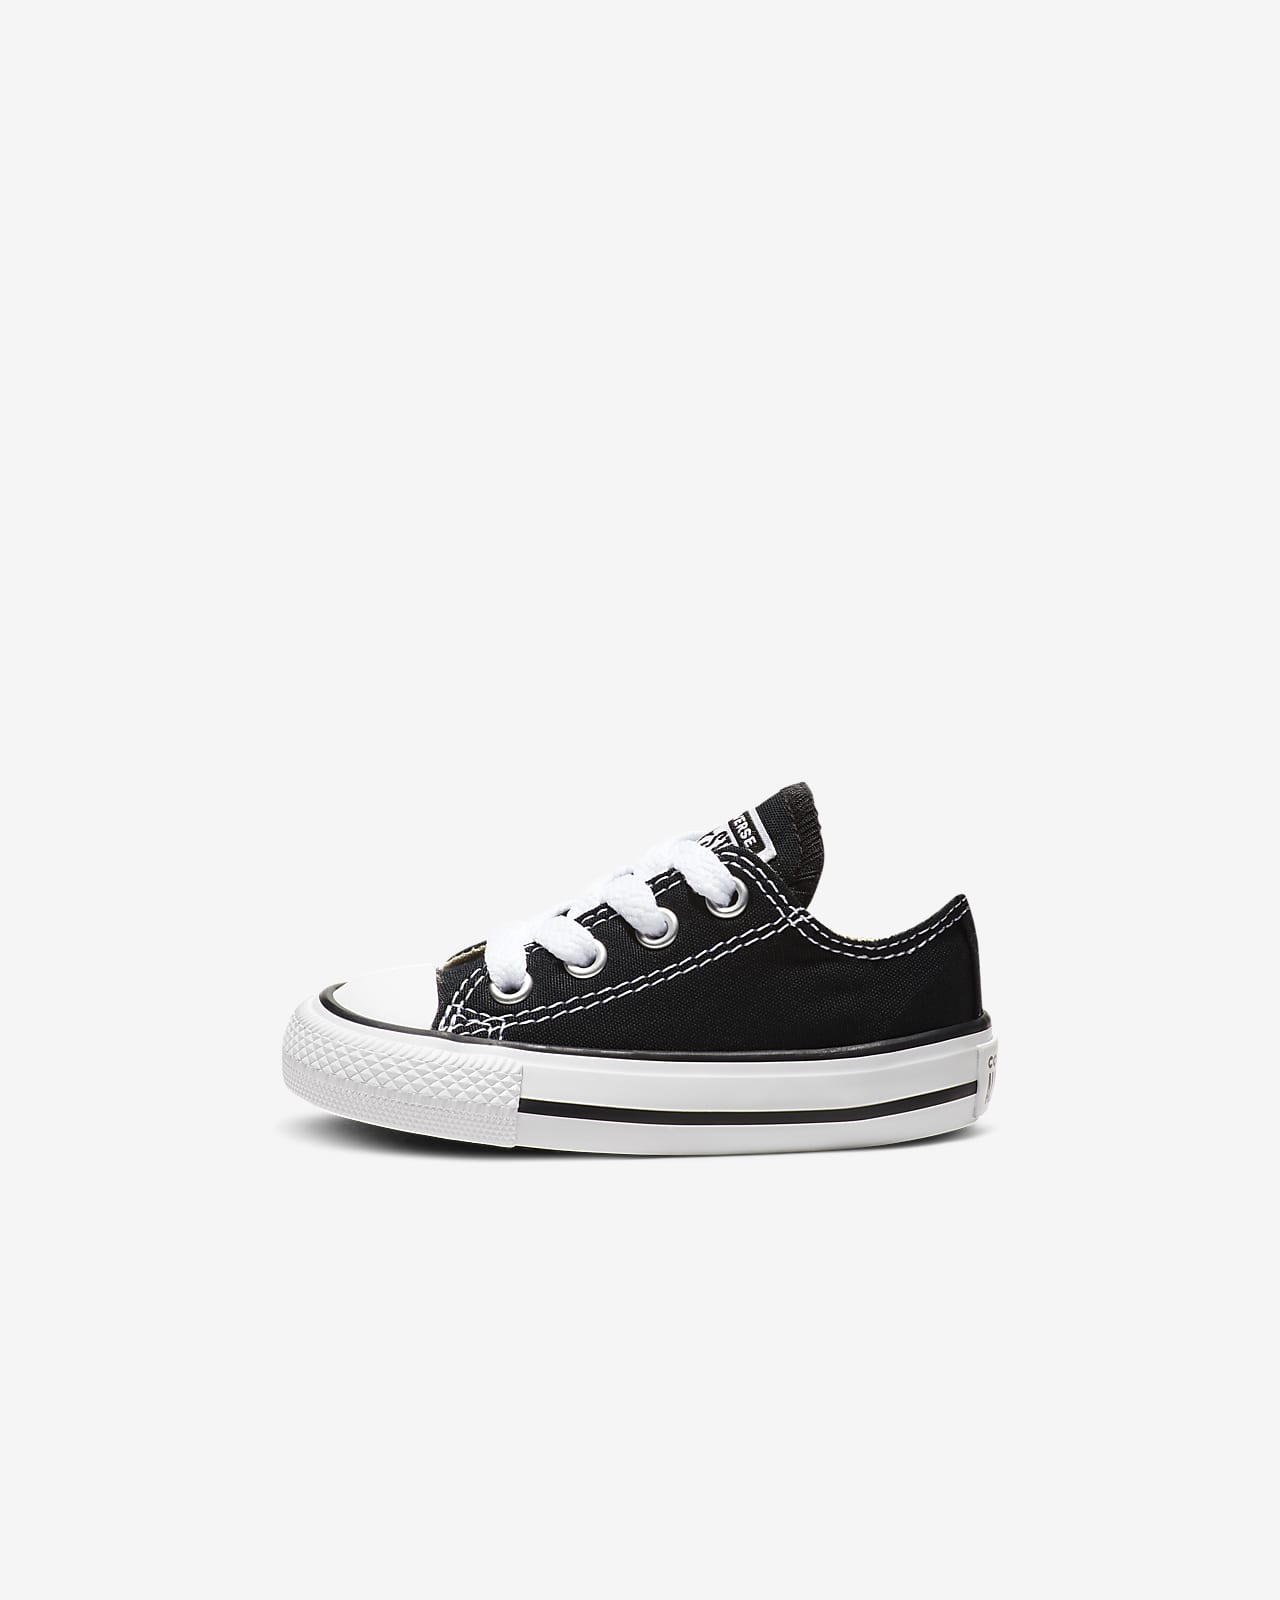 chucks shoes for toddlers